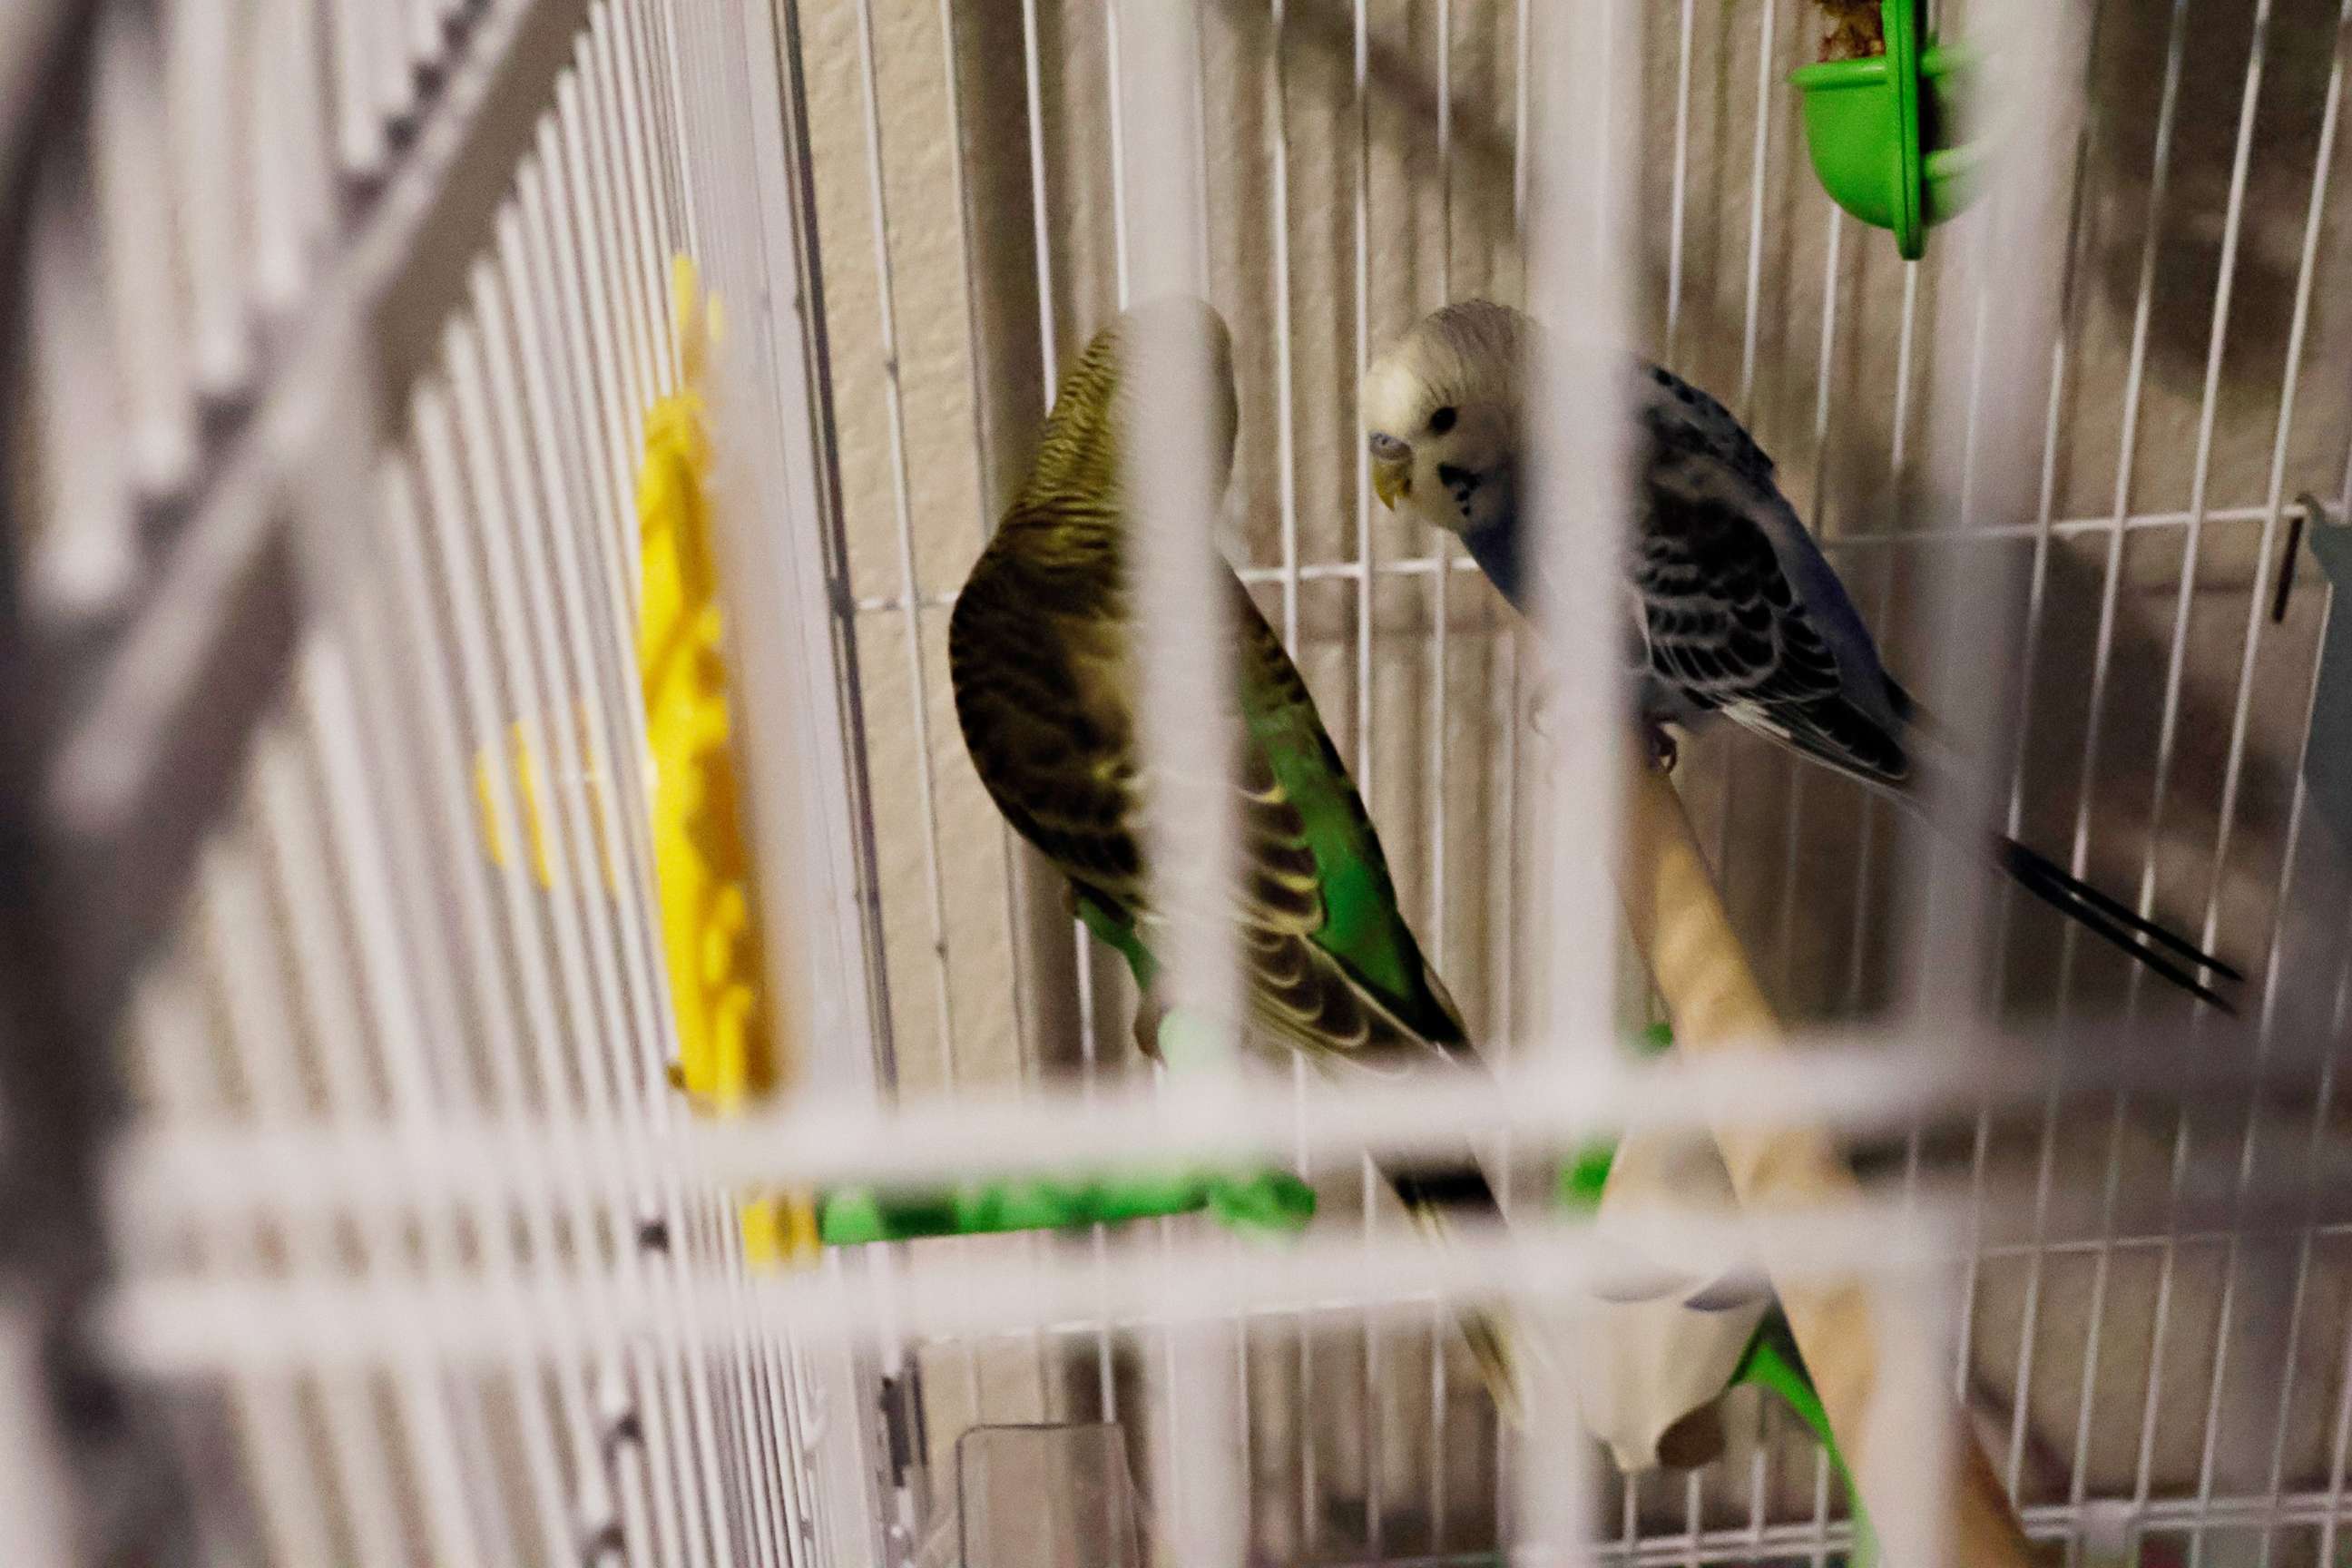 PHOTO: Noah's parakeets, Saul, left, and Rico, right, are seen in his room at his home in Uvalde, Texas, on Oct. 22, 2022